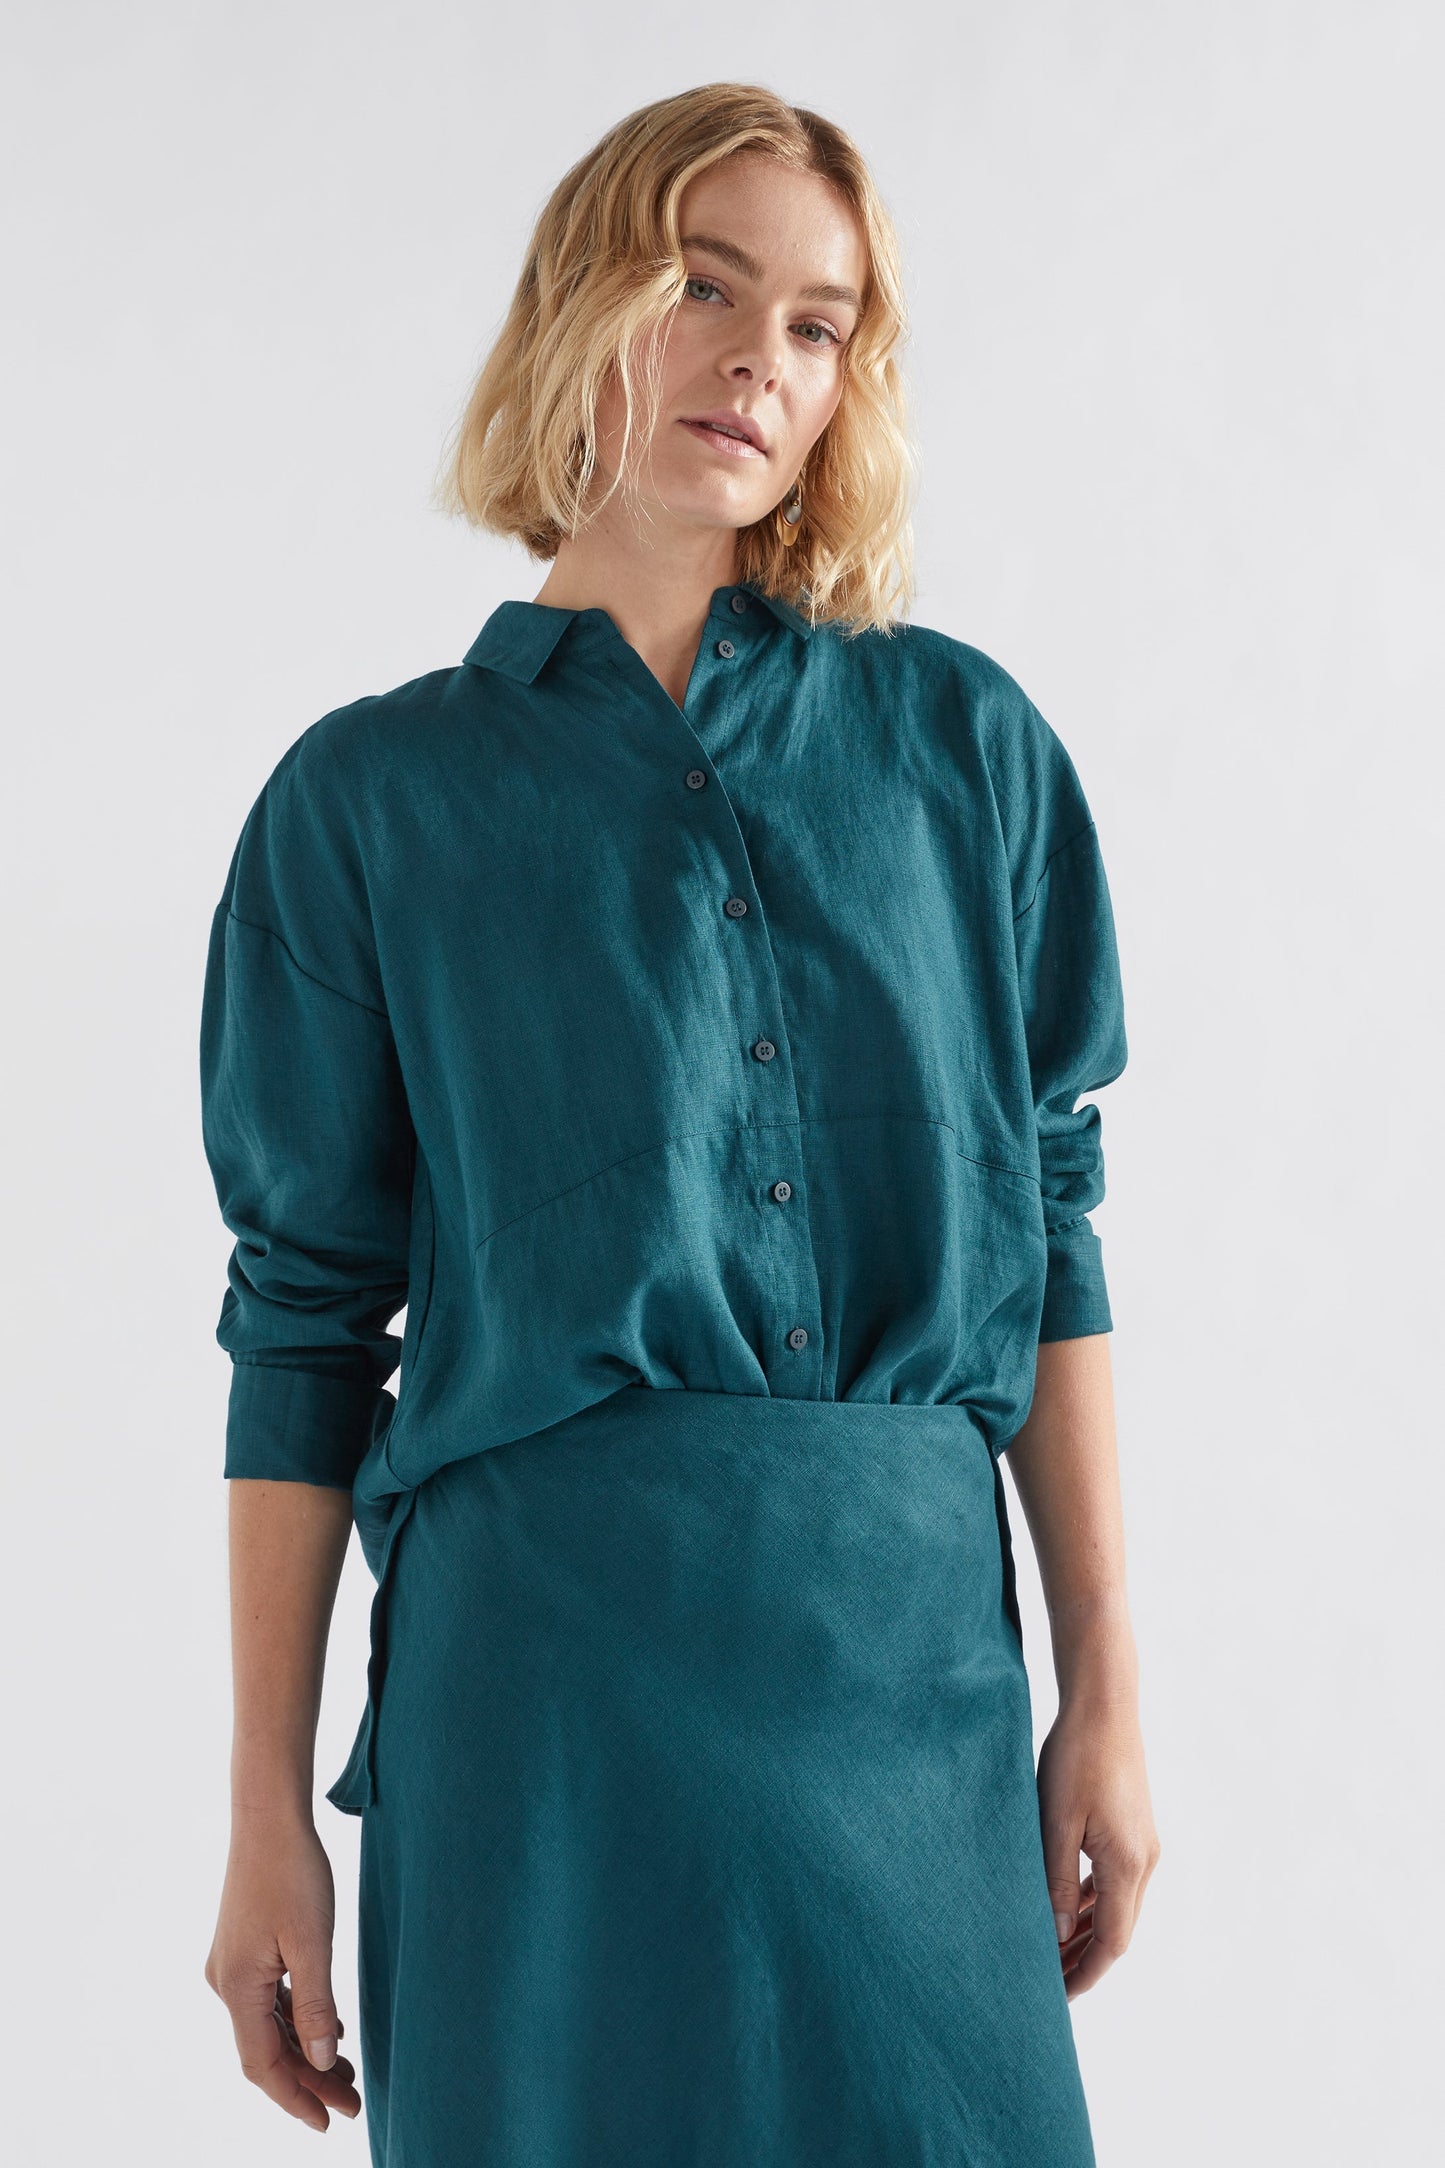 Stilla Linen Shirt with High-Low Hem and Back Pleat Detail Model front | PEACOCK